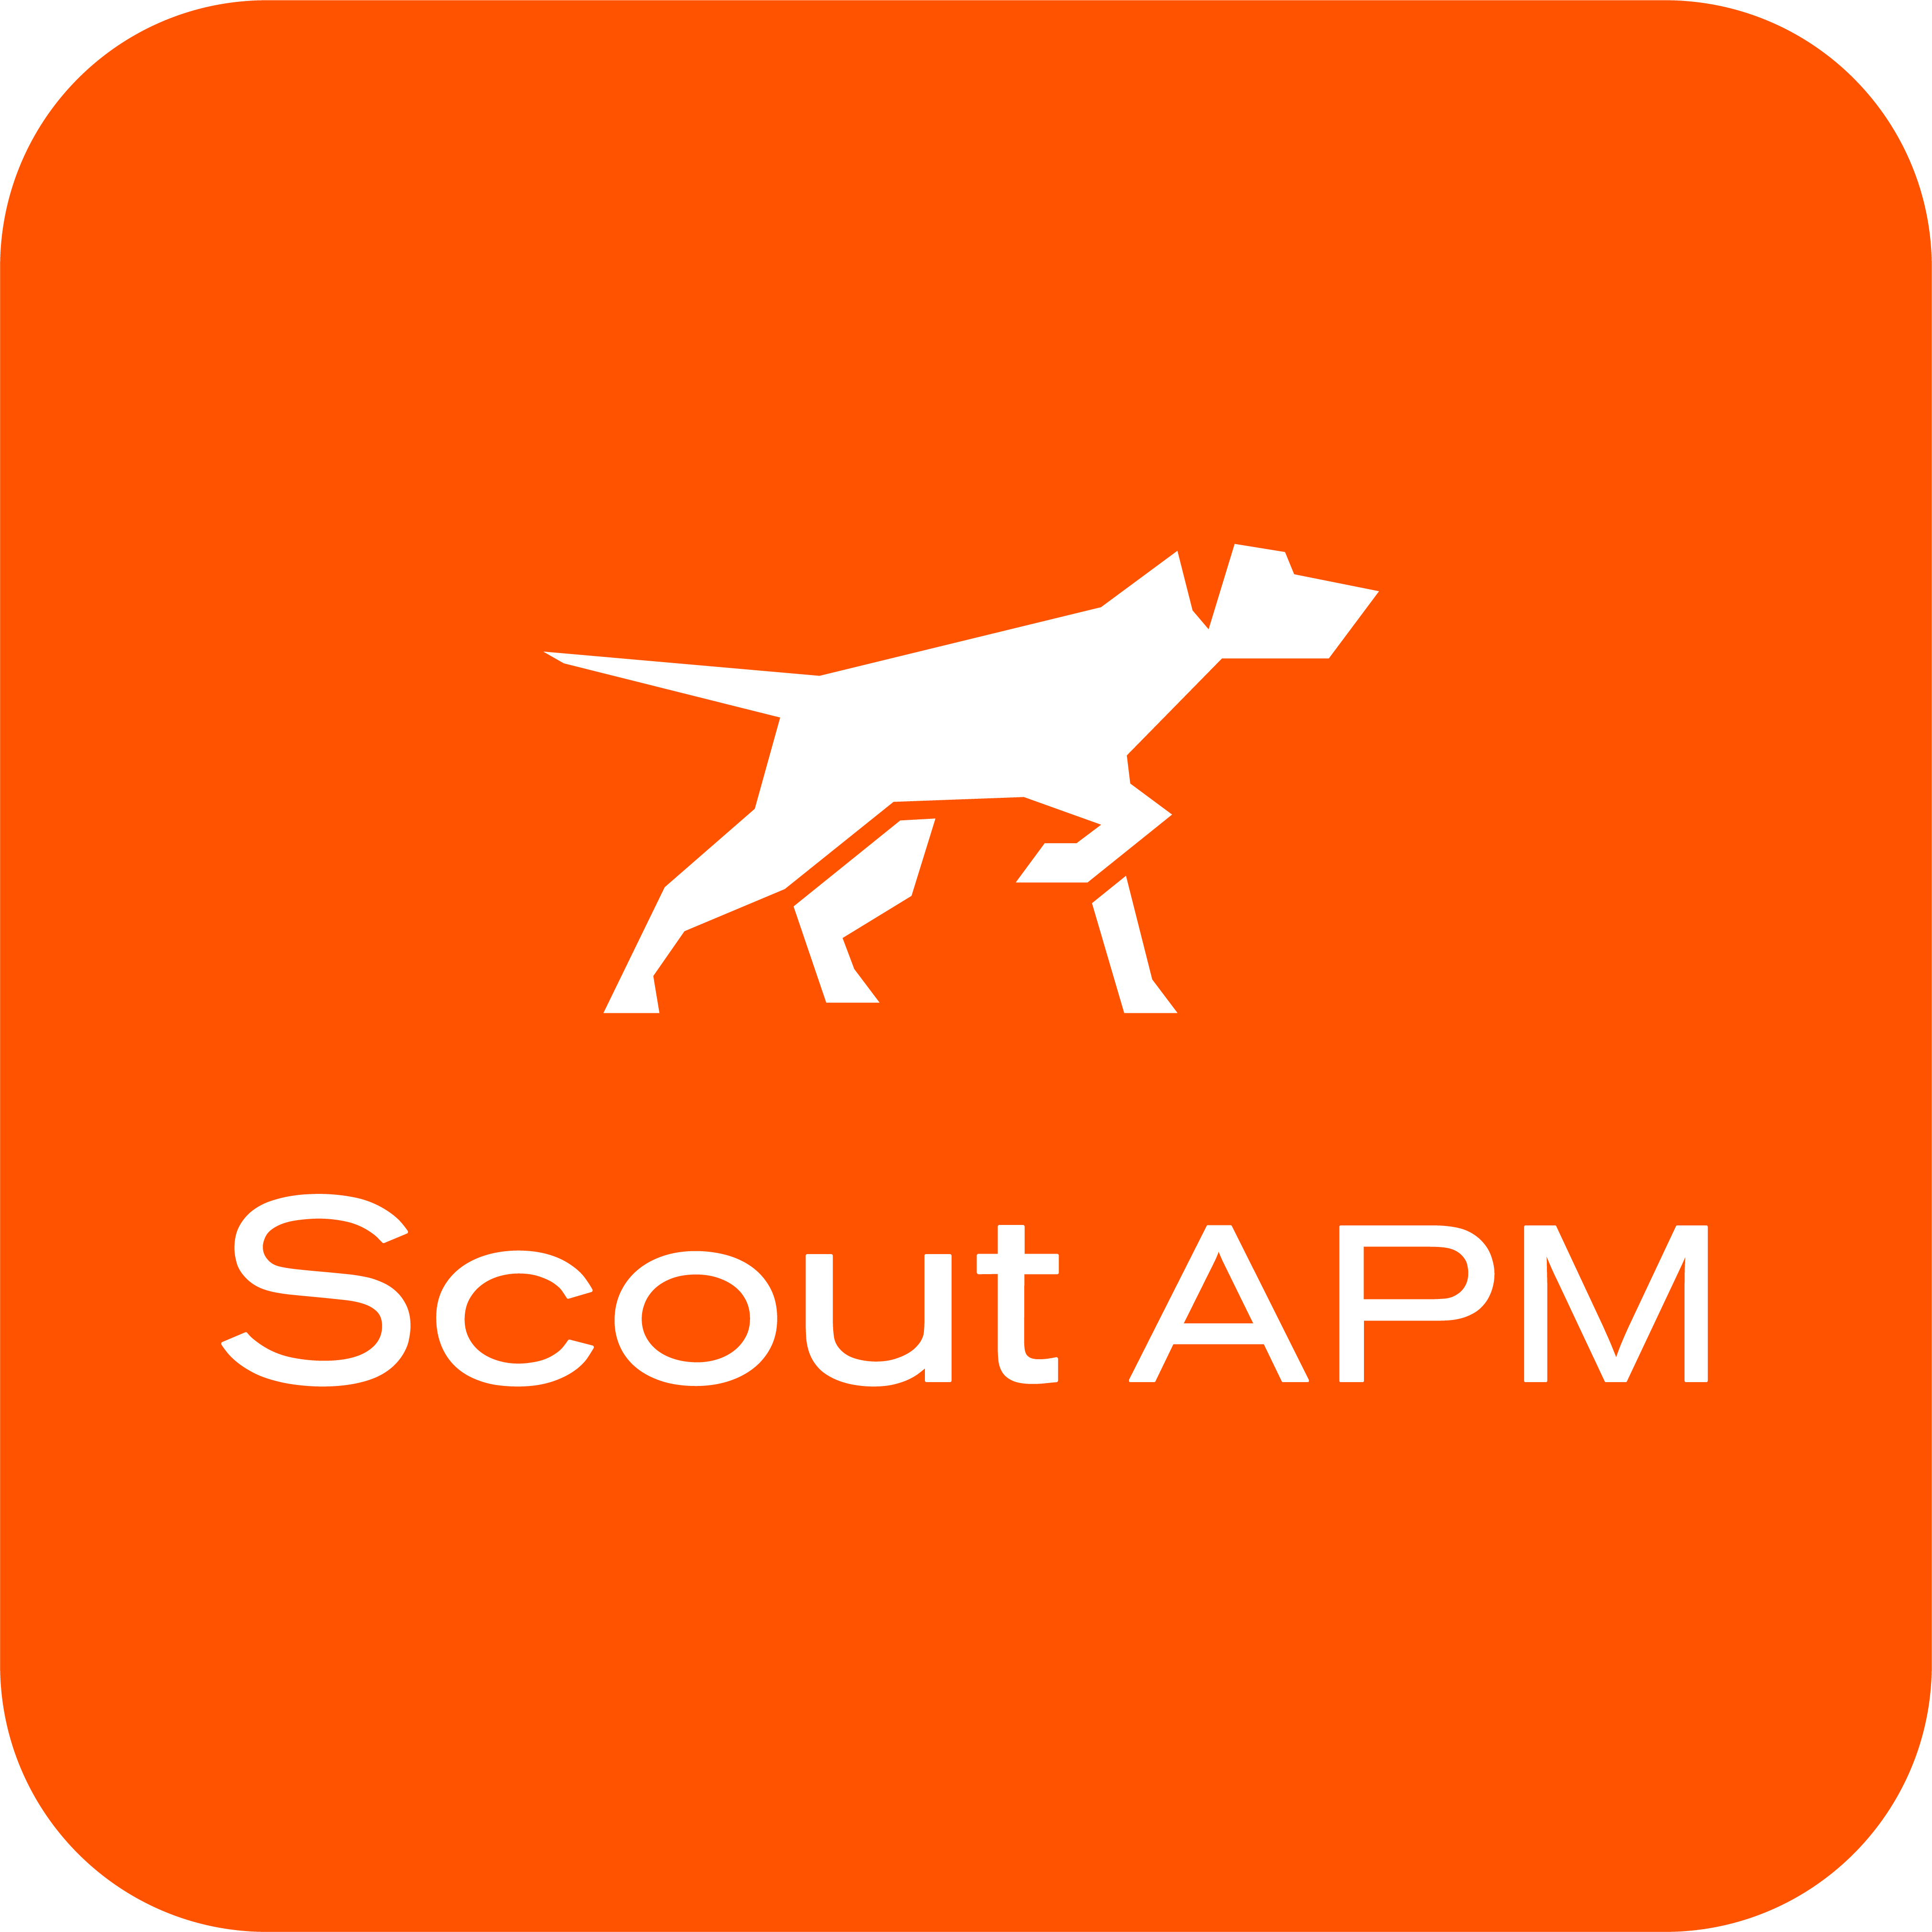 Scout APM Announces Release of External Service Monitoring